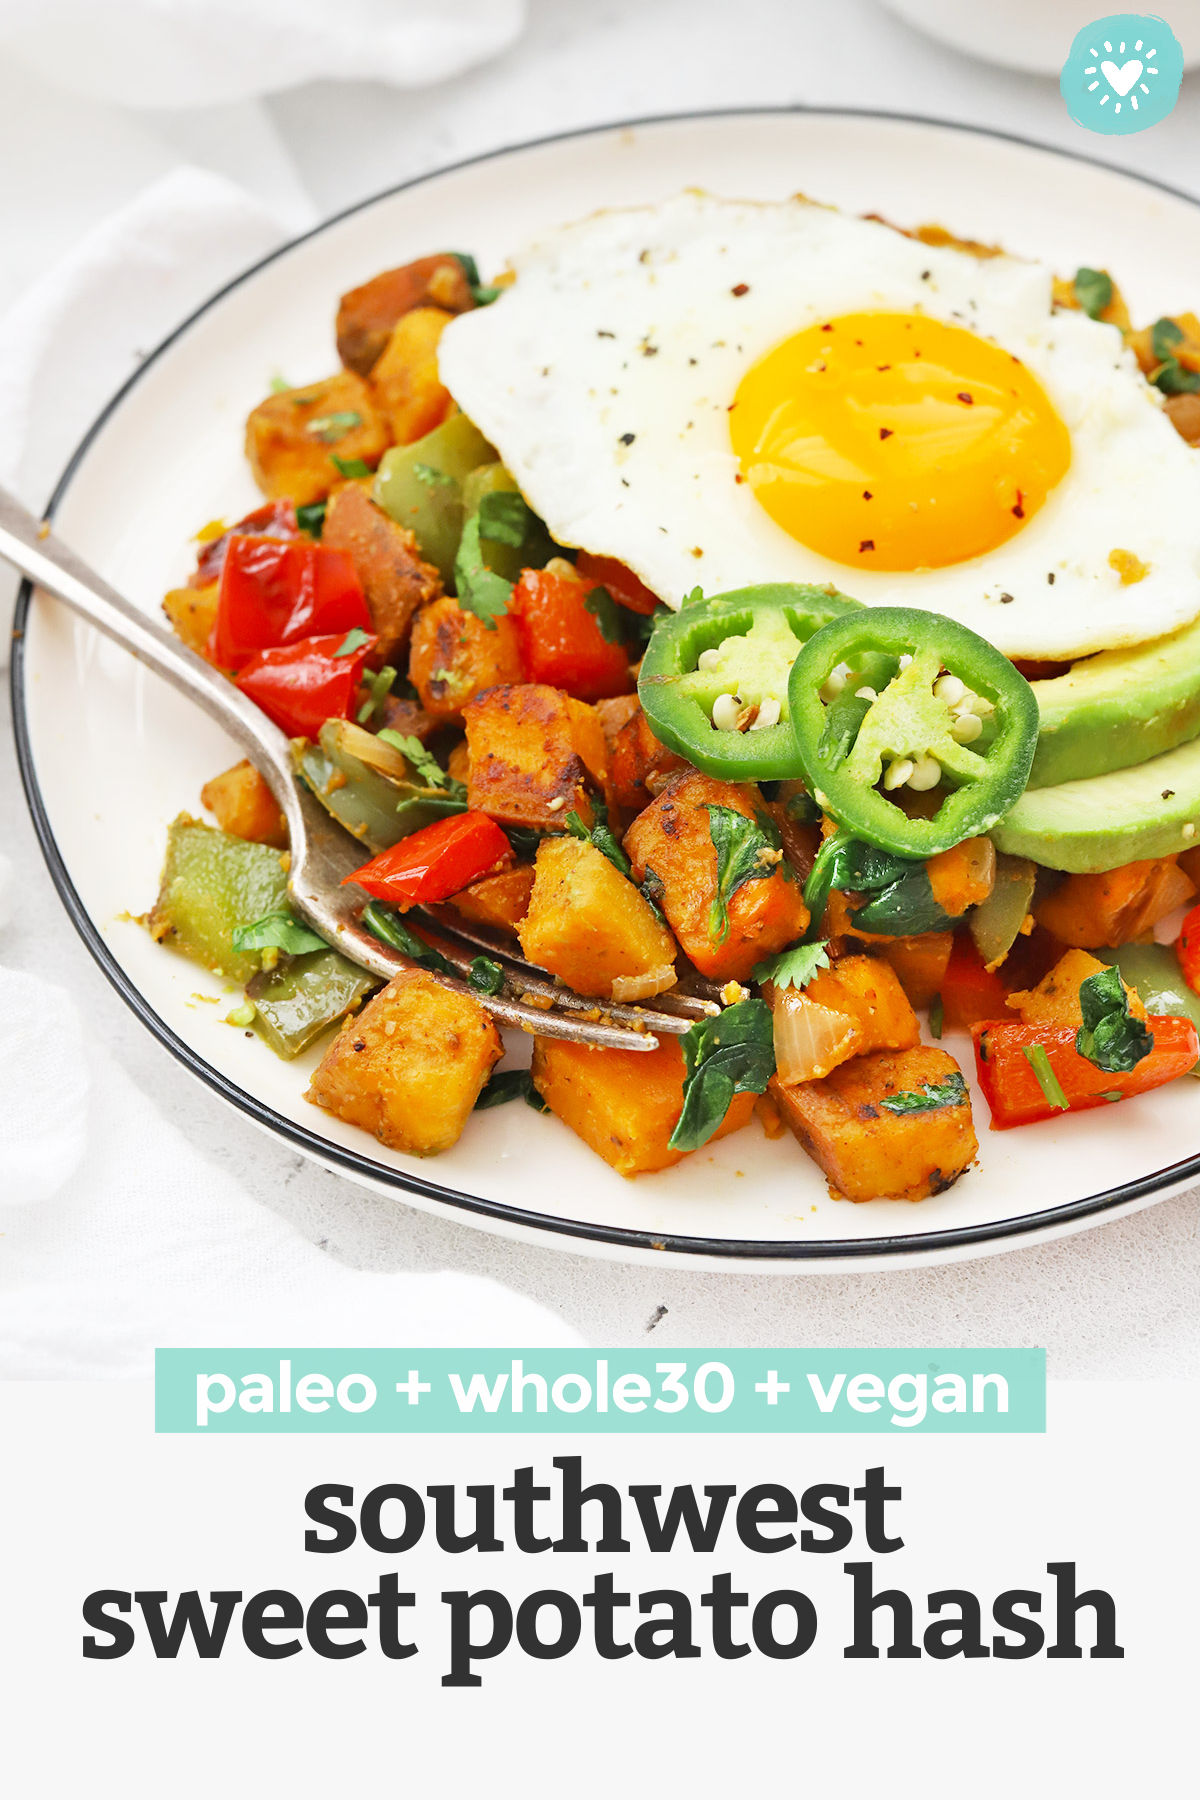 Sweet Potato Hash - This Southwest Sweet Potato Hash has a blend of warm spices, colorful veggies, and will keep you satisfied all morning long. A delicious, healthy breakfast any day of the week! (Vegan, Paleo, Whole30) // Paleo Sweet Potato Hash // Whole30 Sweet Potato Hash // Vegan Sweet Potato Hash // Whole30 breakfast // Paleo breakfast #healthybreakfast #paleo #vegan #glutenfree #vegetarian #whole30